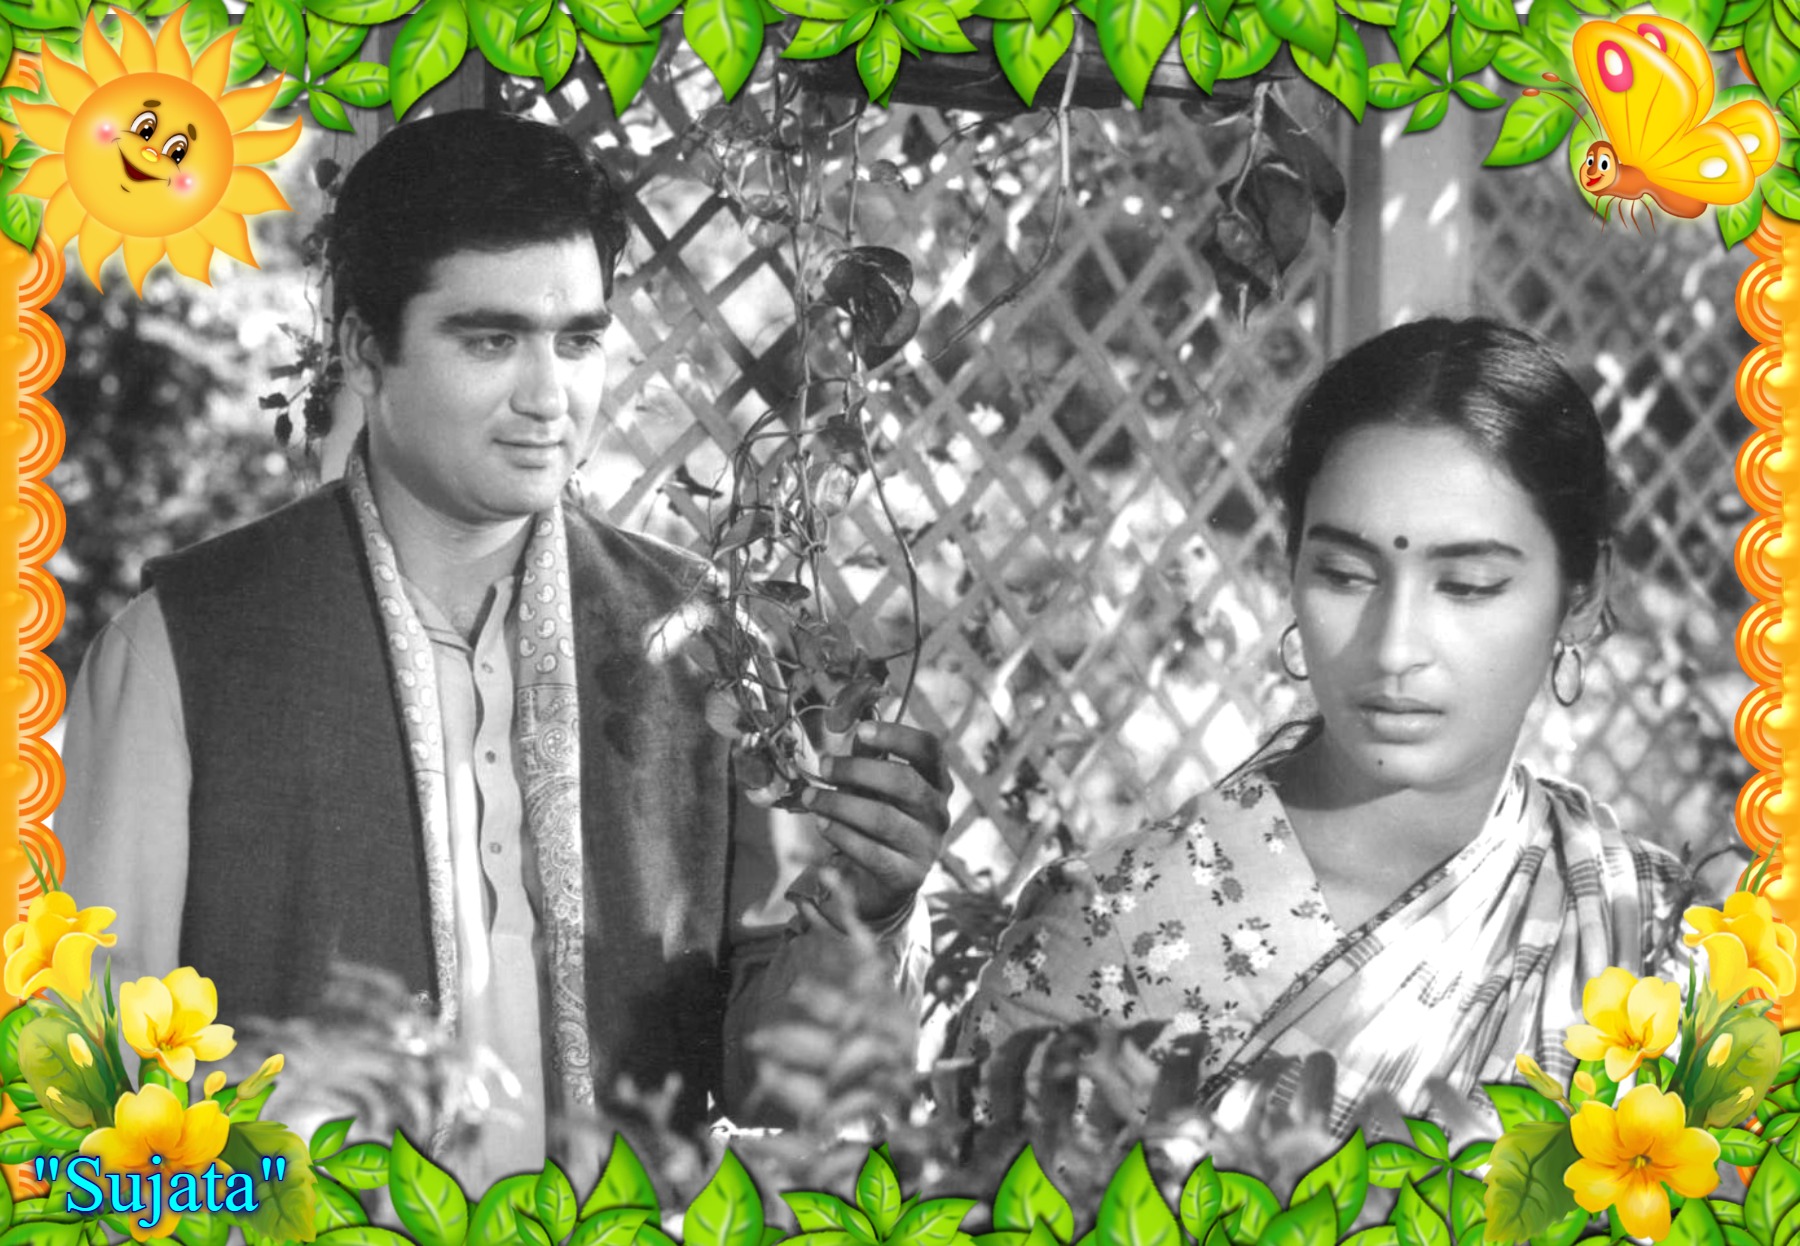 You are currently viewing “Nutan Enjoyed Larger Than Life Image”